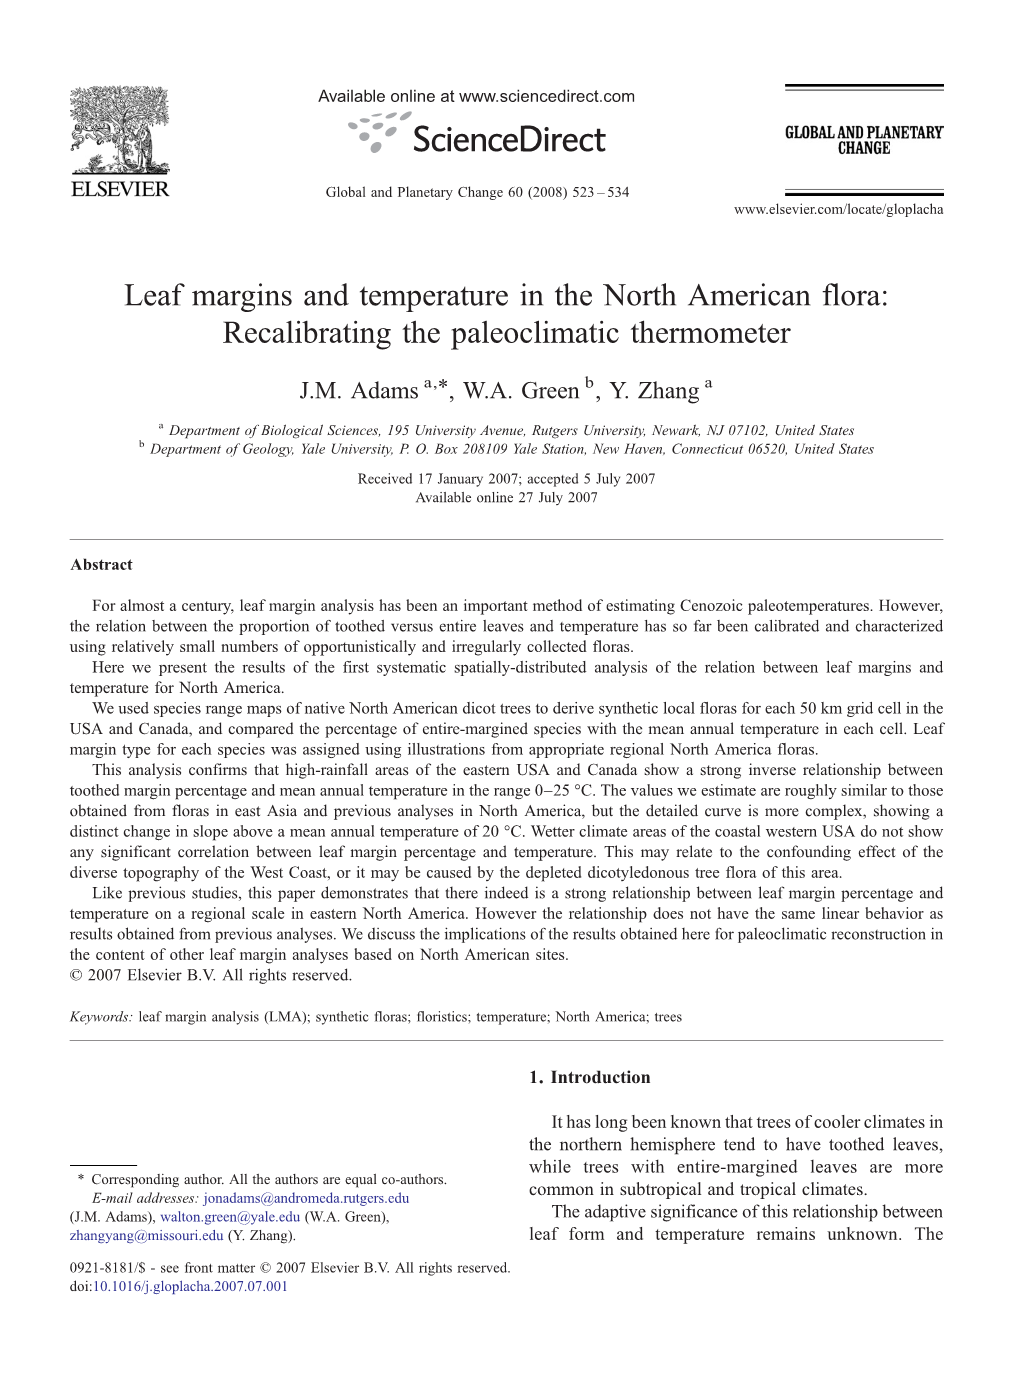 Leaf Margins and Temperature in the North American Flora: Recalibrating the Paleoclimatic Thermometer ⁎ J.M